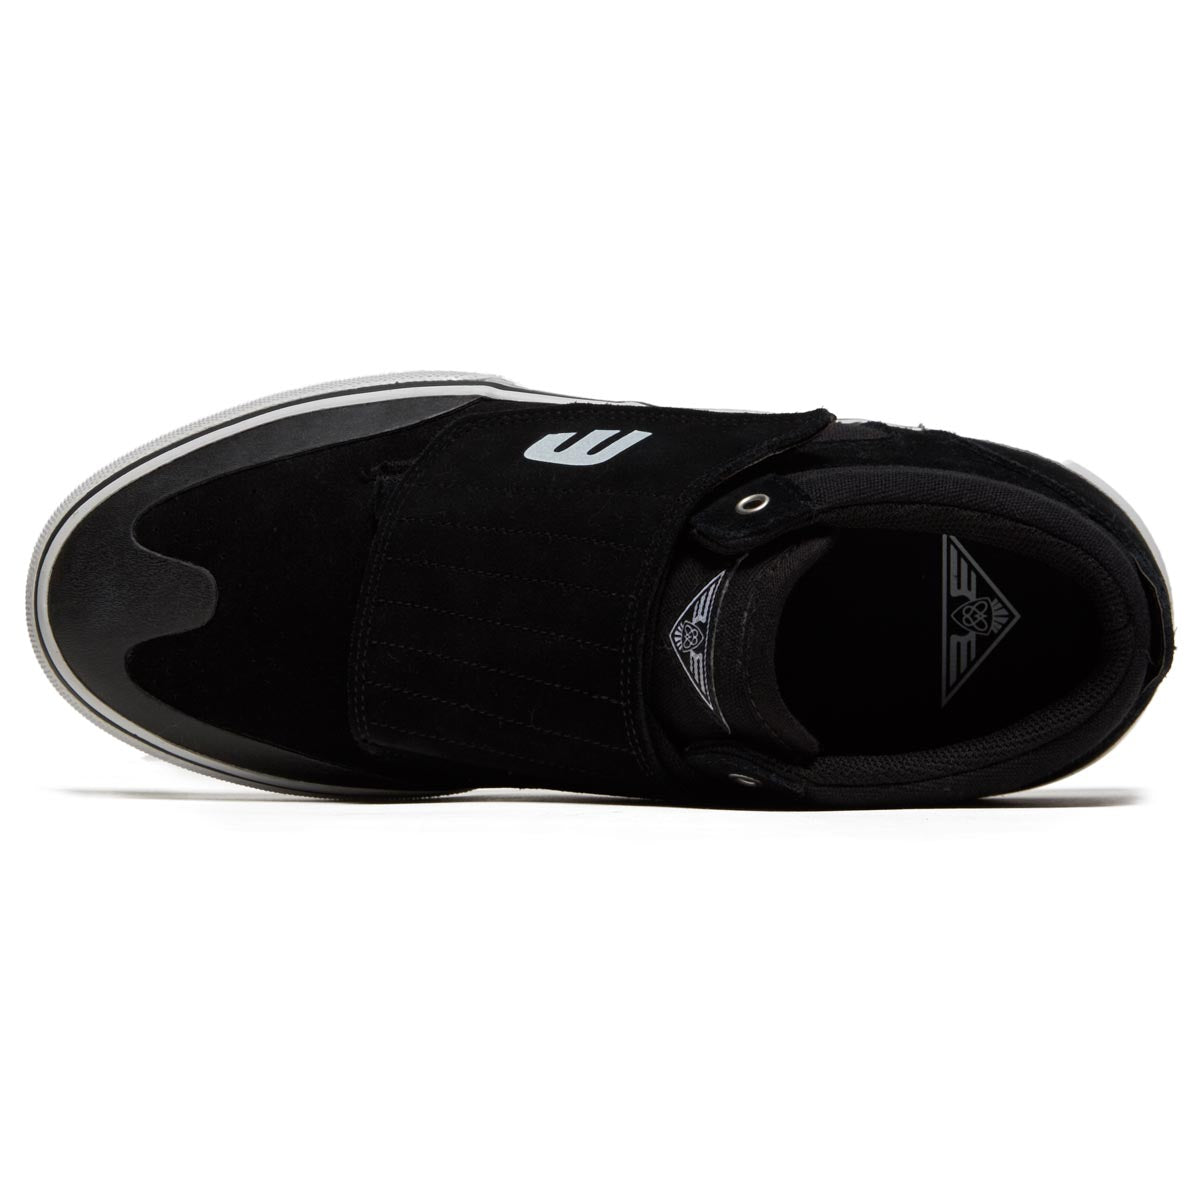 Etnies Andy Anderson Shoes - Black/White image 3